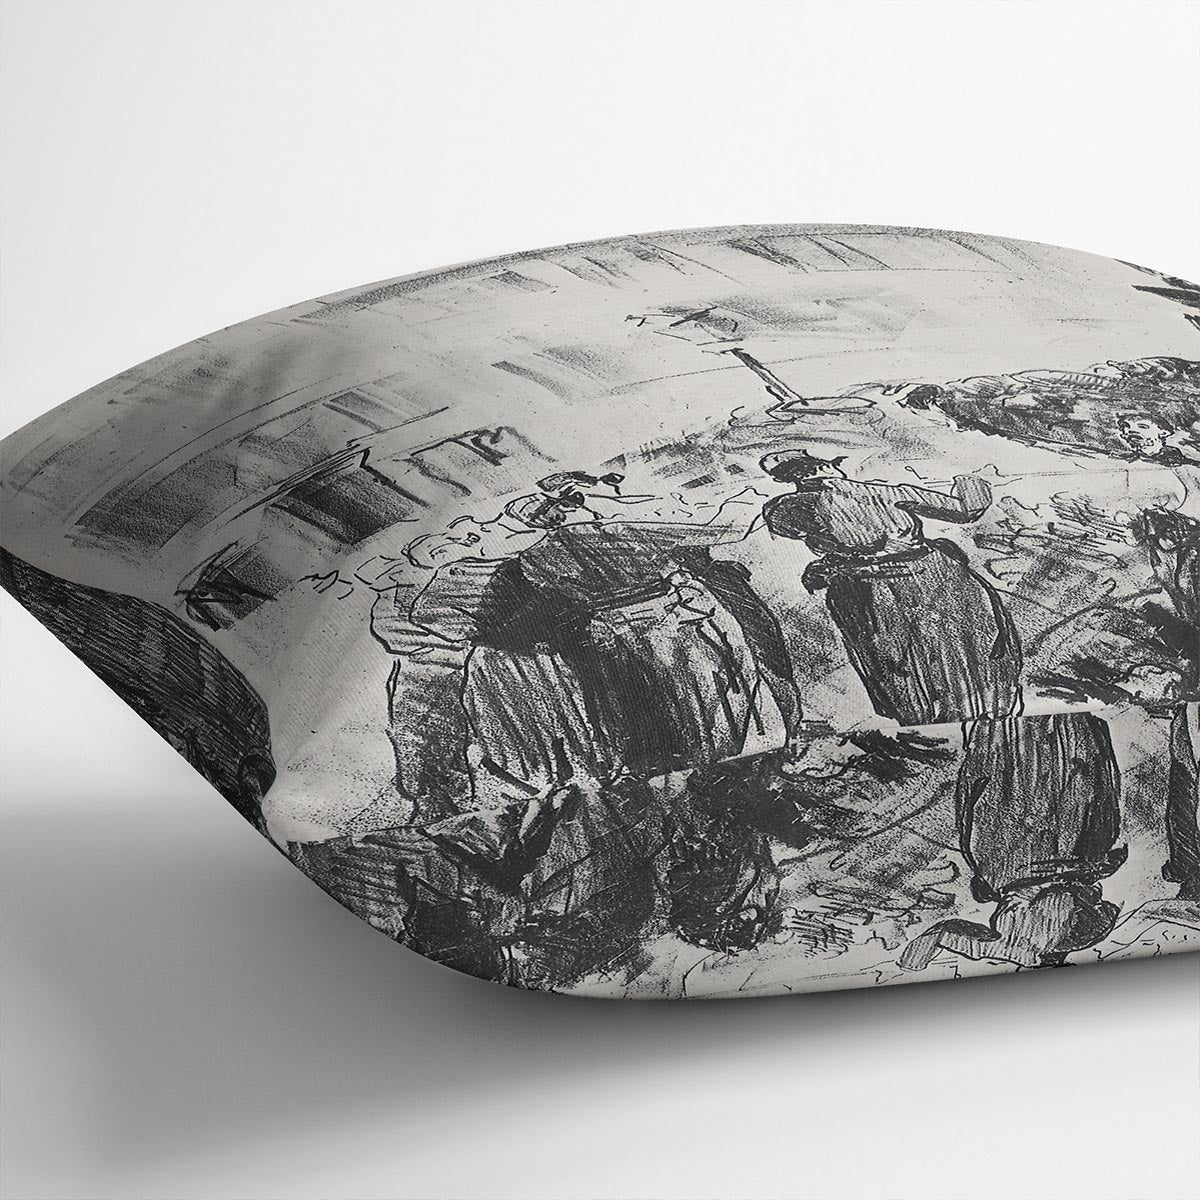 The Barricade by Manet Cushion